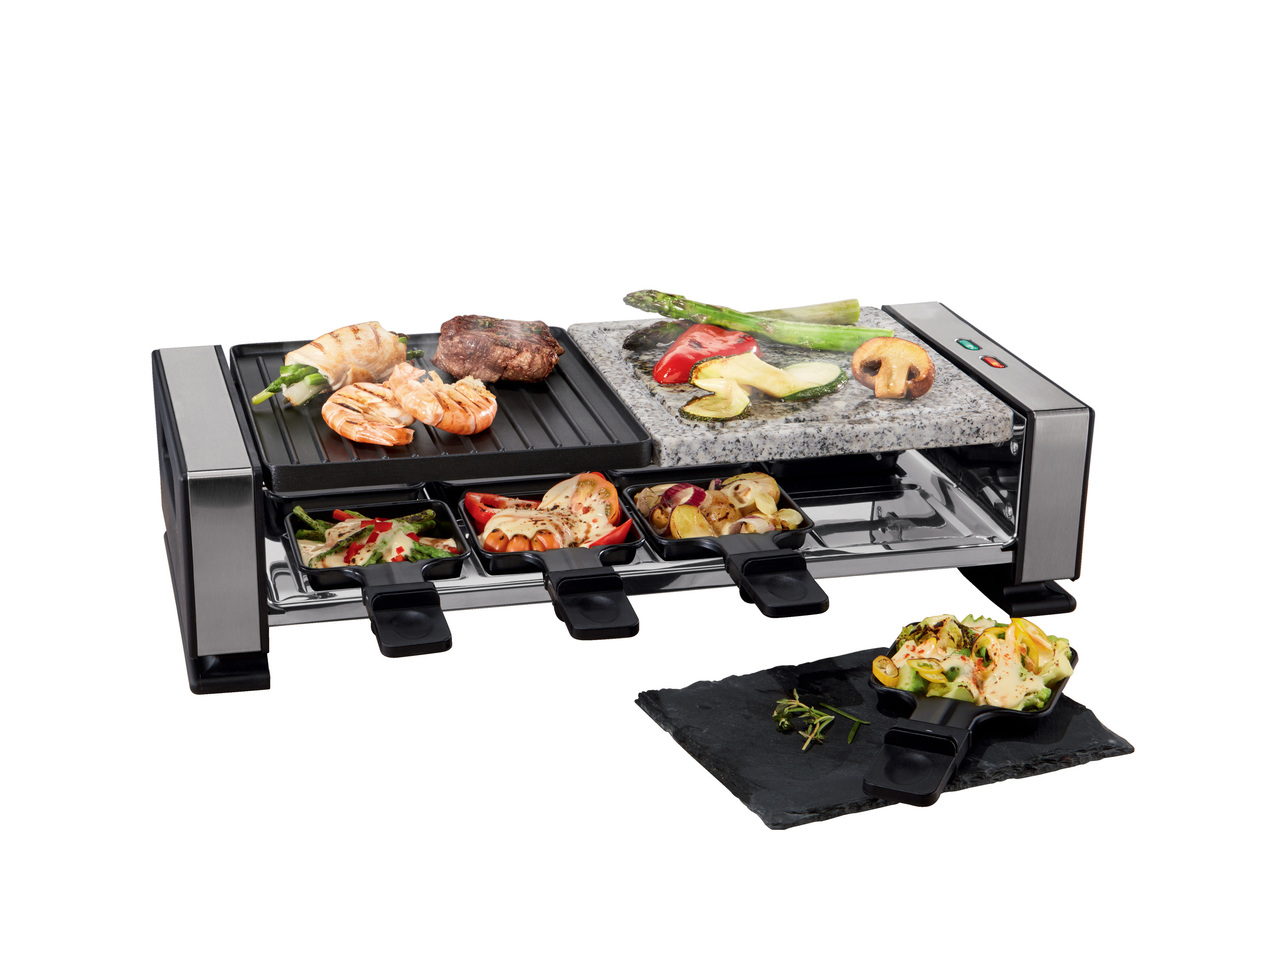 SILVERCREST KITCHEN TOOL 1400W Raclette Grill